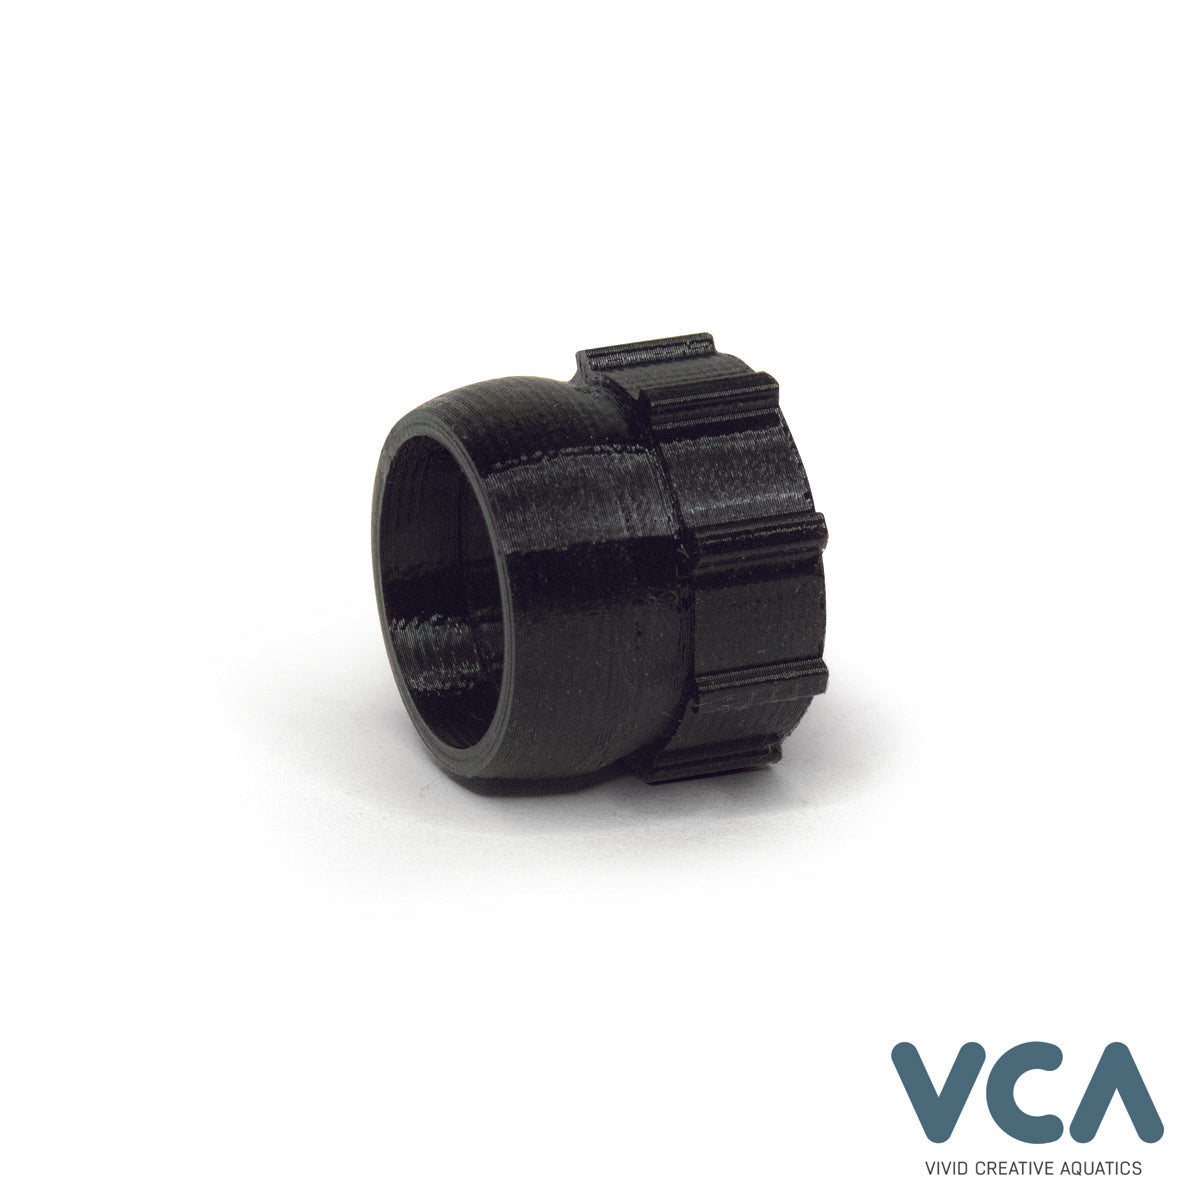 VCA Red Sea MAX Flow Nozzle to Loc-Line Adapter – 16mm Slip-Fit to 1/2in Loc-Line